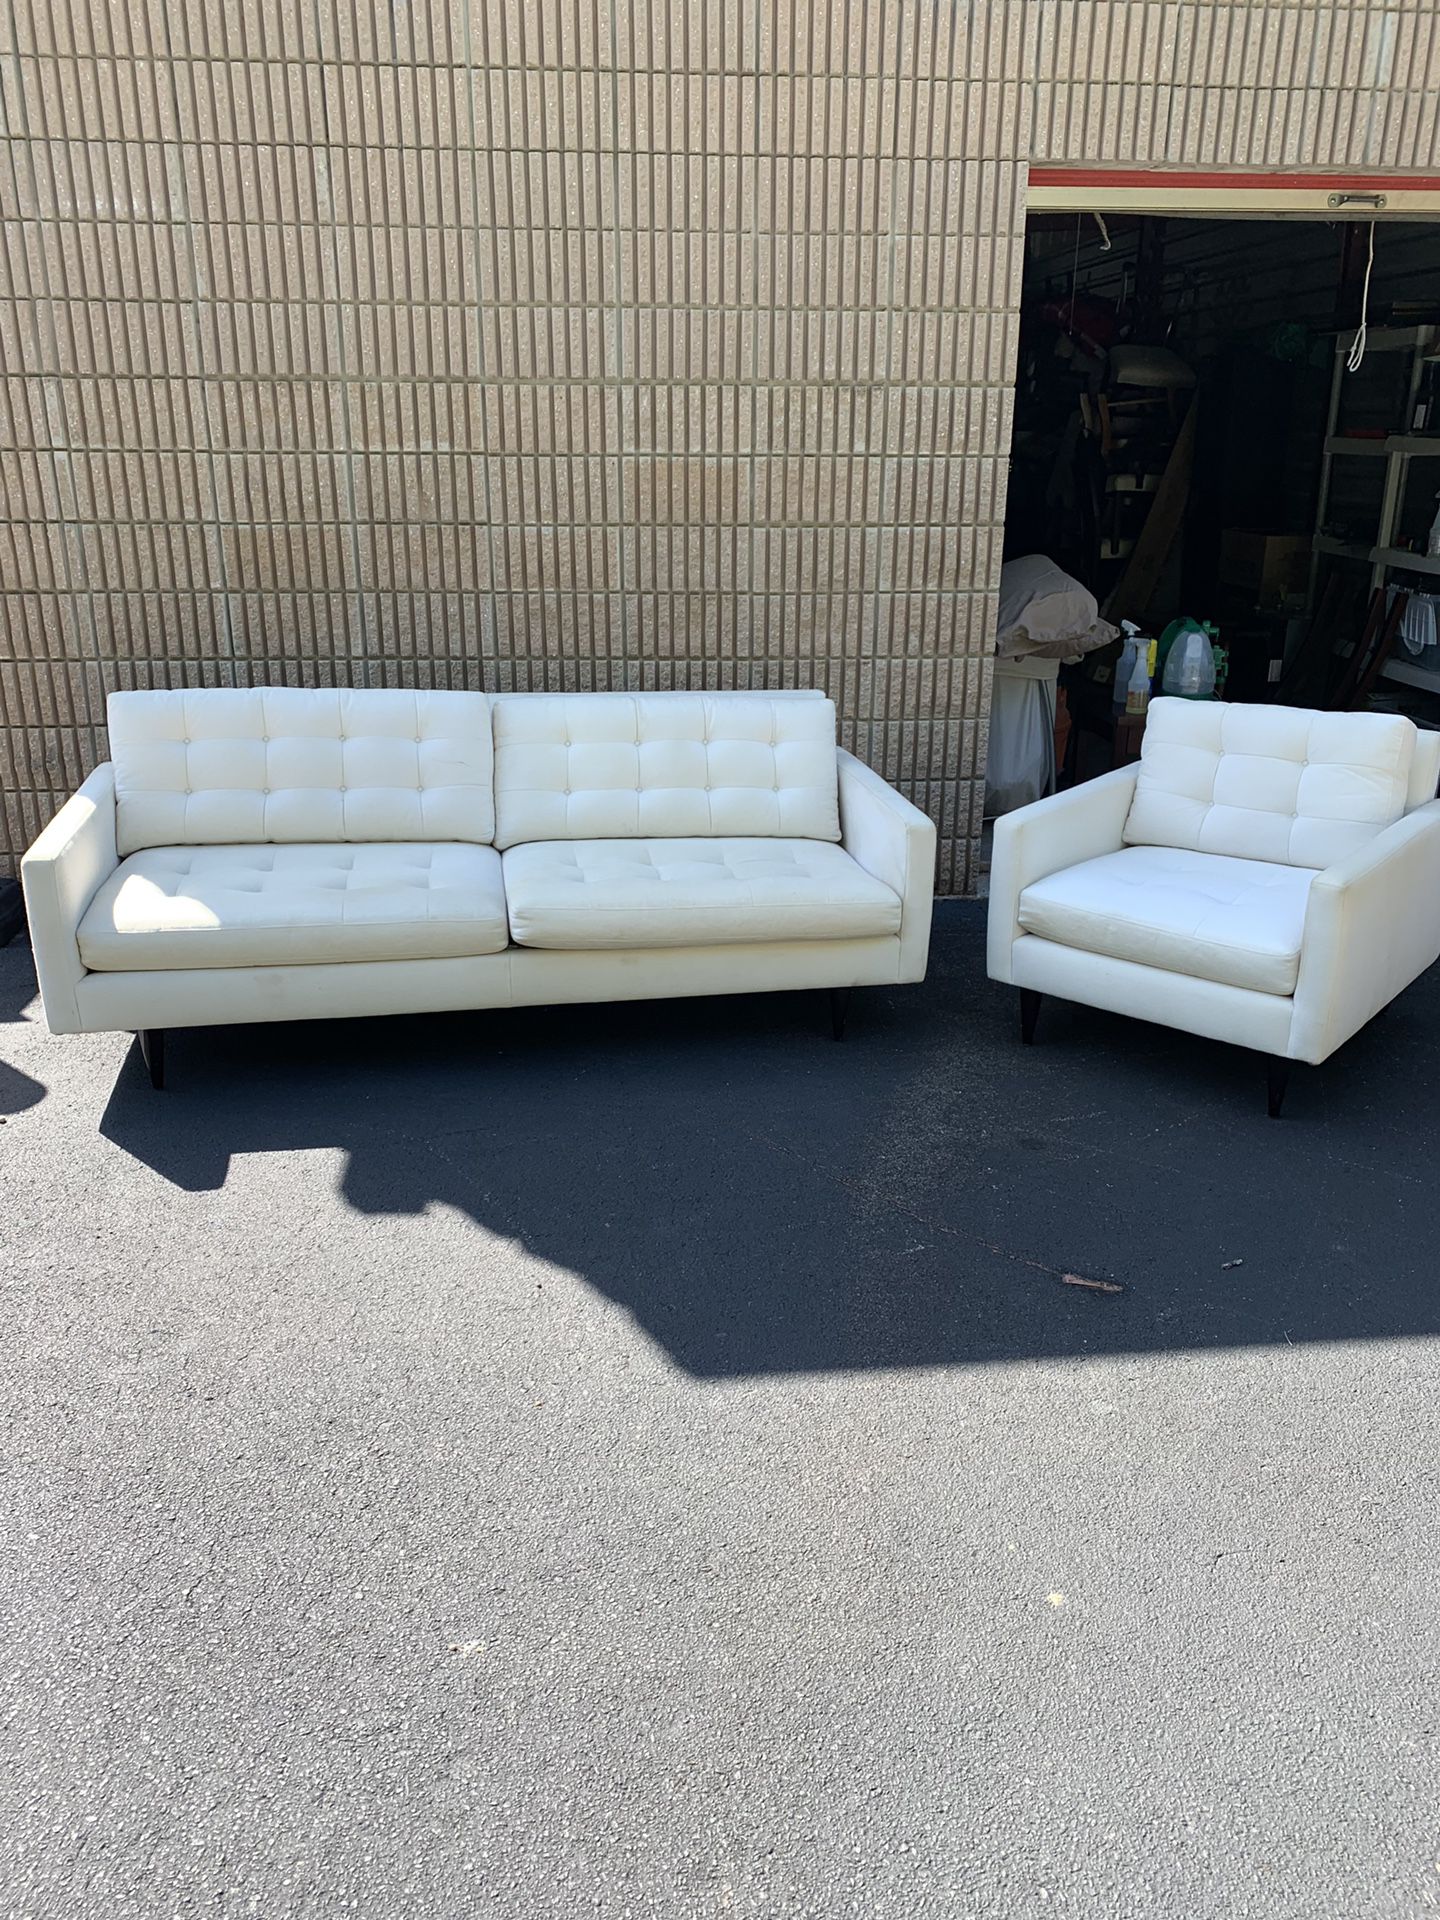 Crate and barrel couch and chair